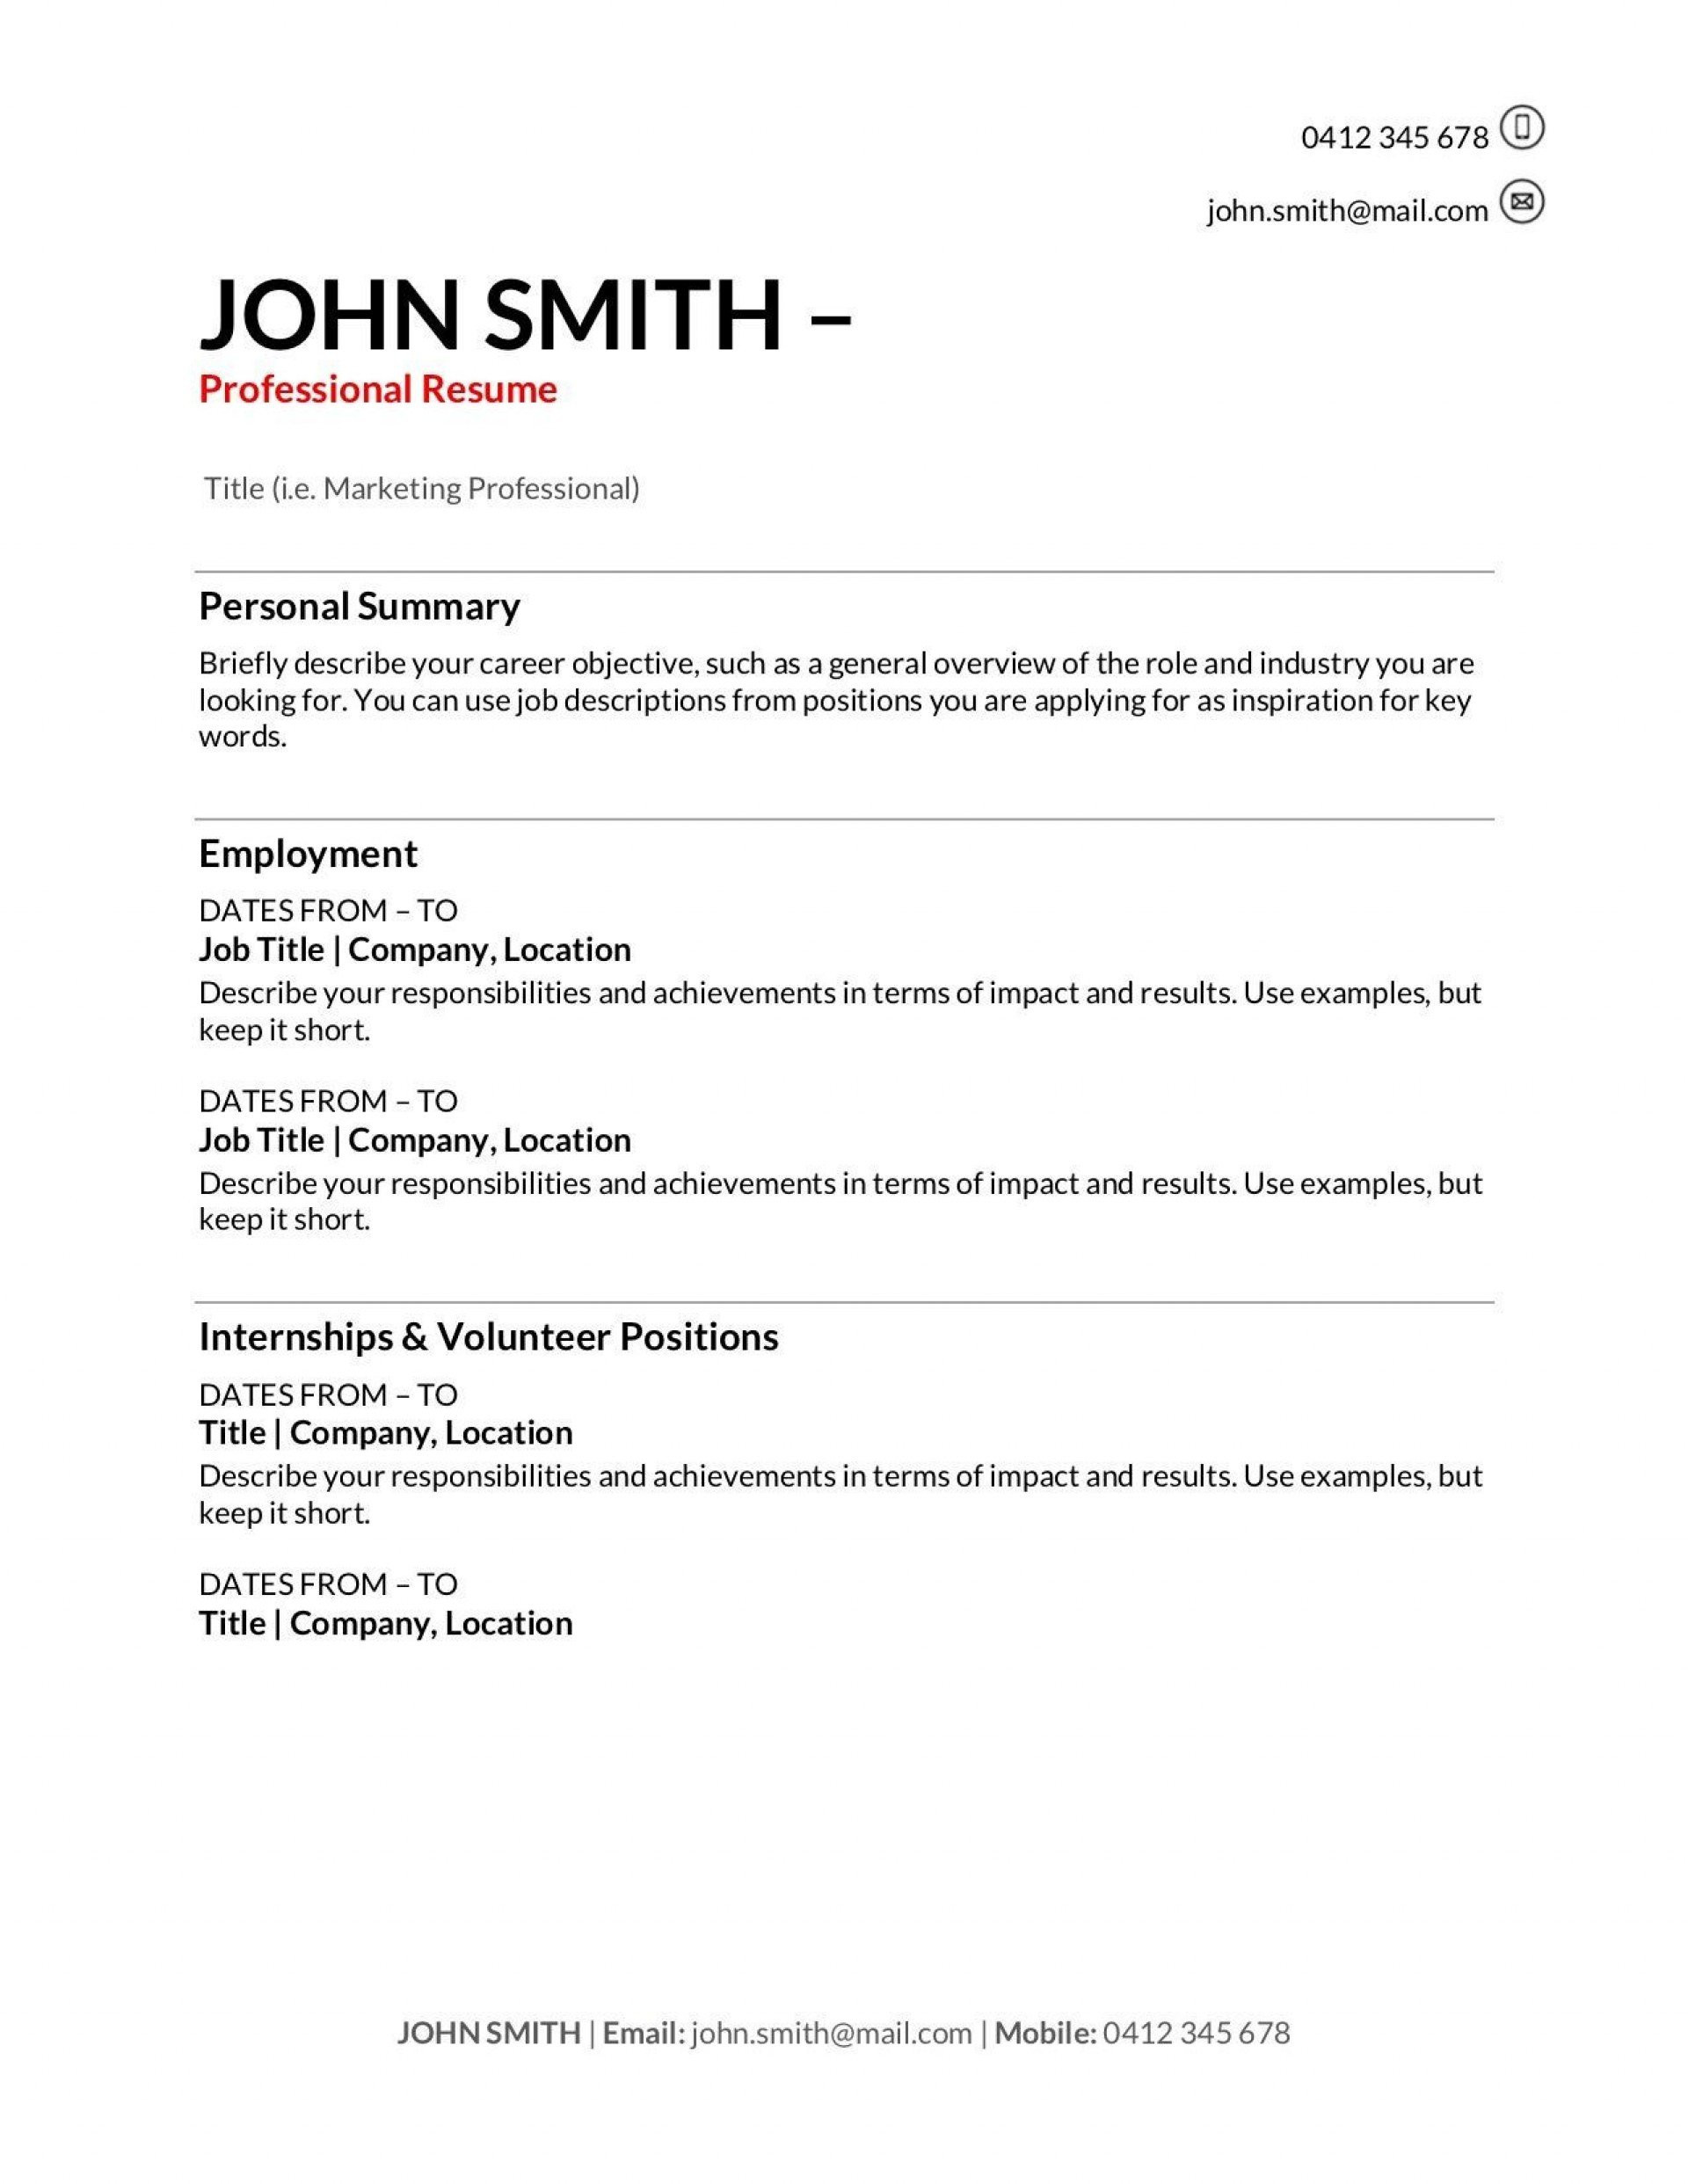 Resume Template for Students First Job How to Make A Resume for Your First Job Examples – Master Your Resume